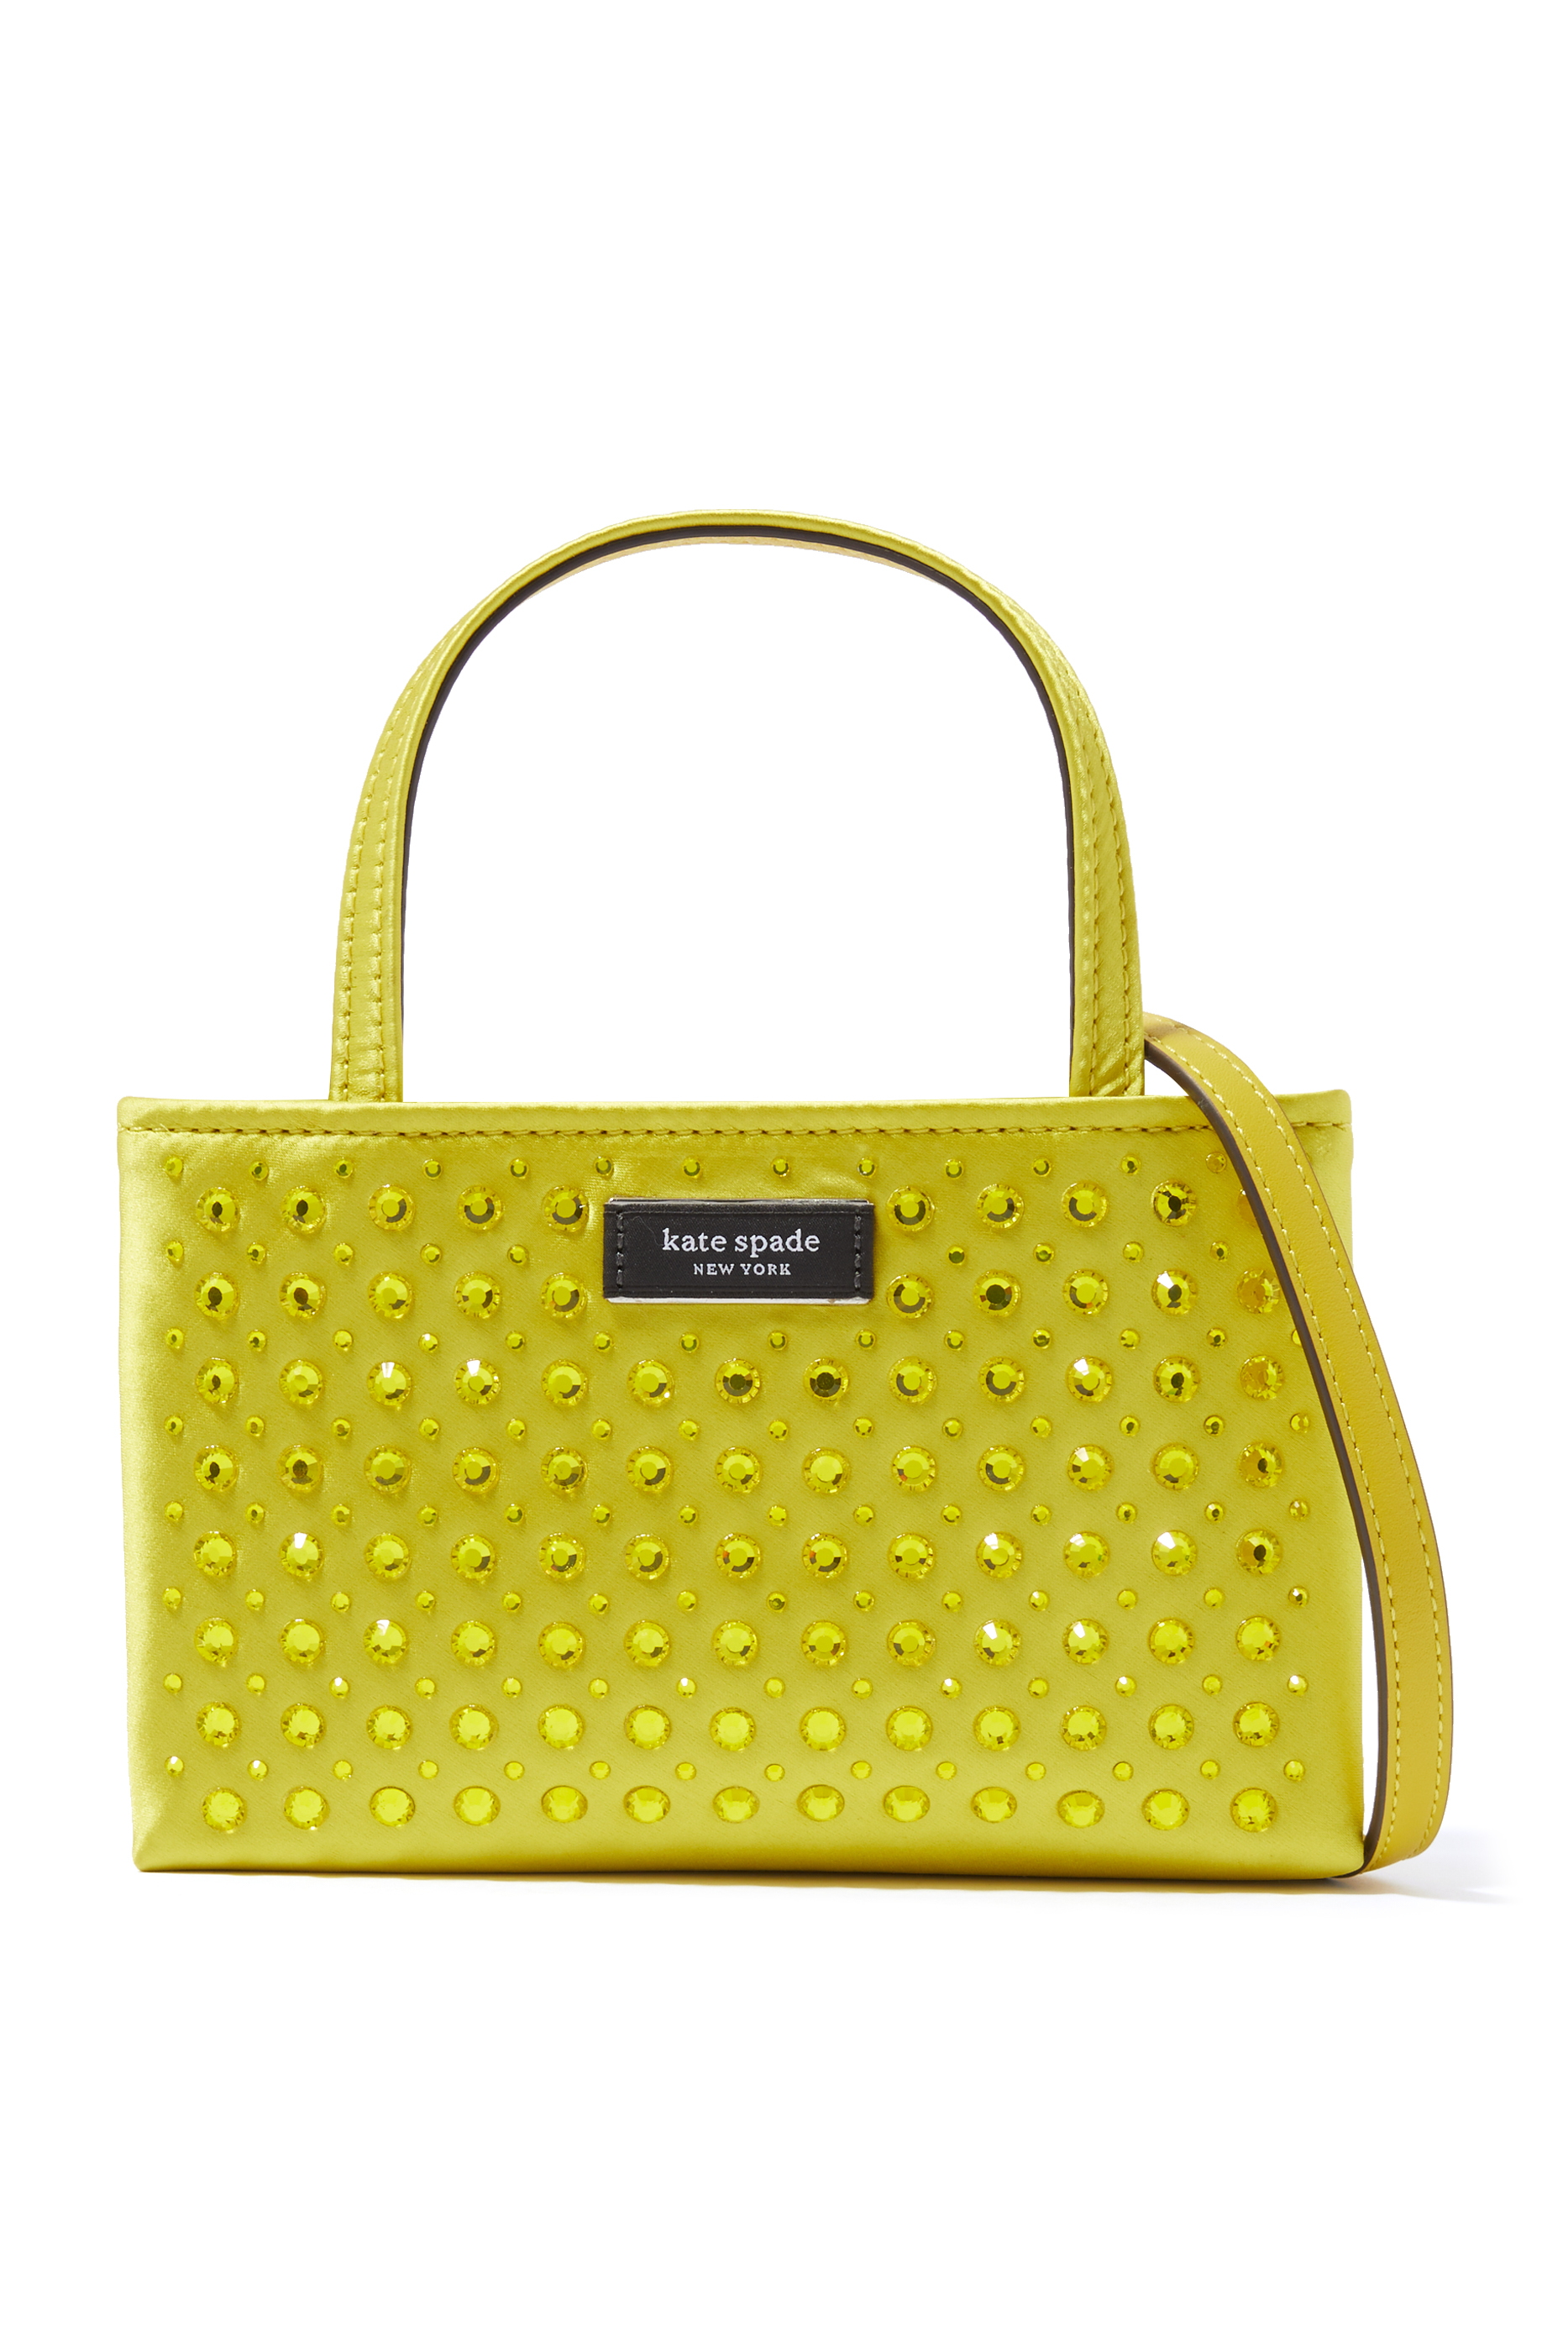 Kate Spade 24-Hour Deals: Get $198 Bags for $49 and $380 Bags for $79